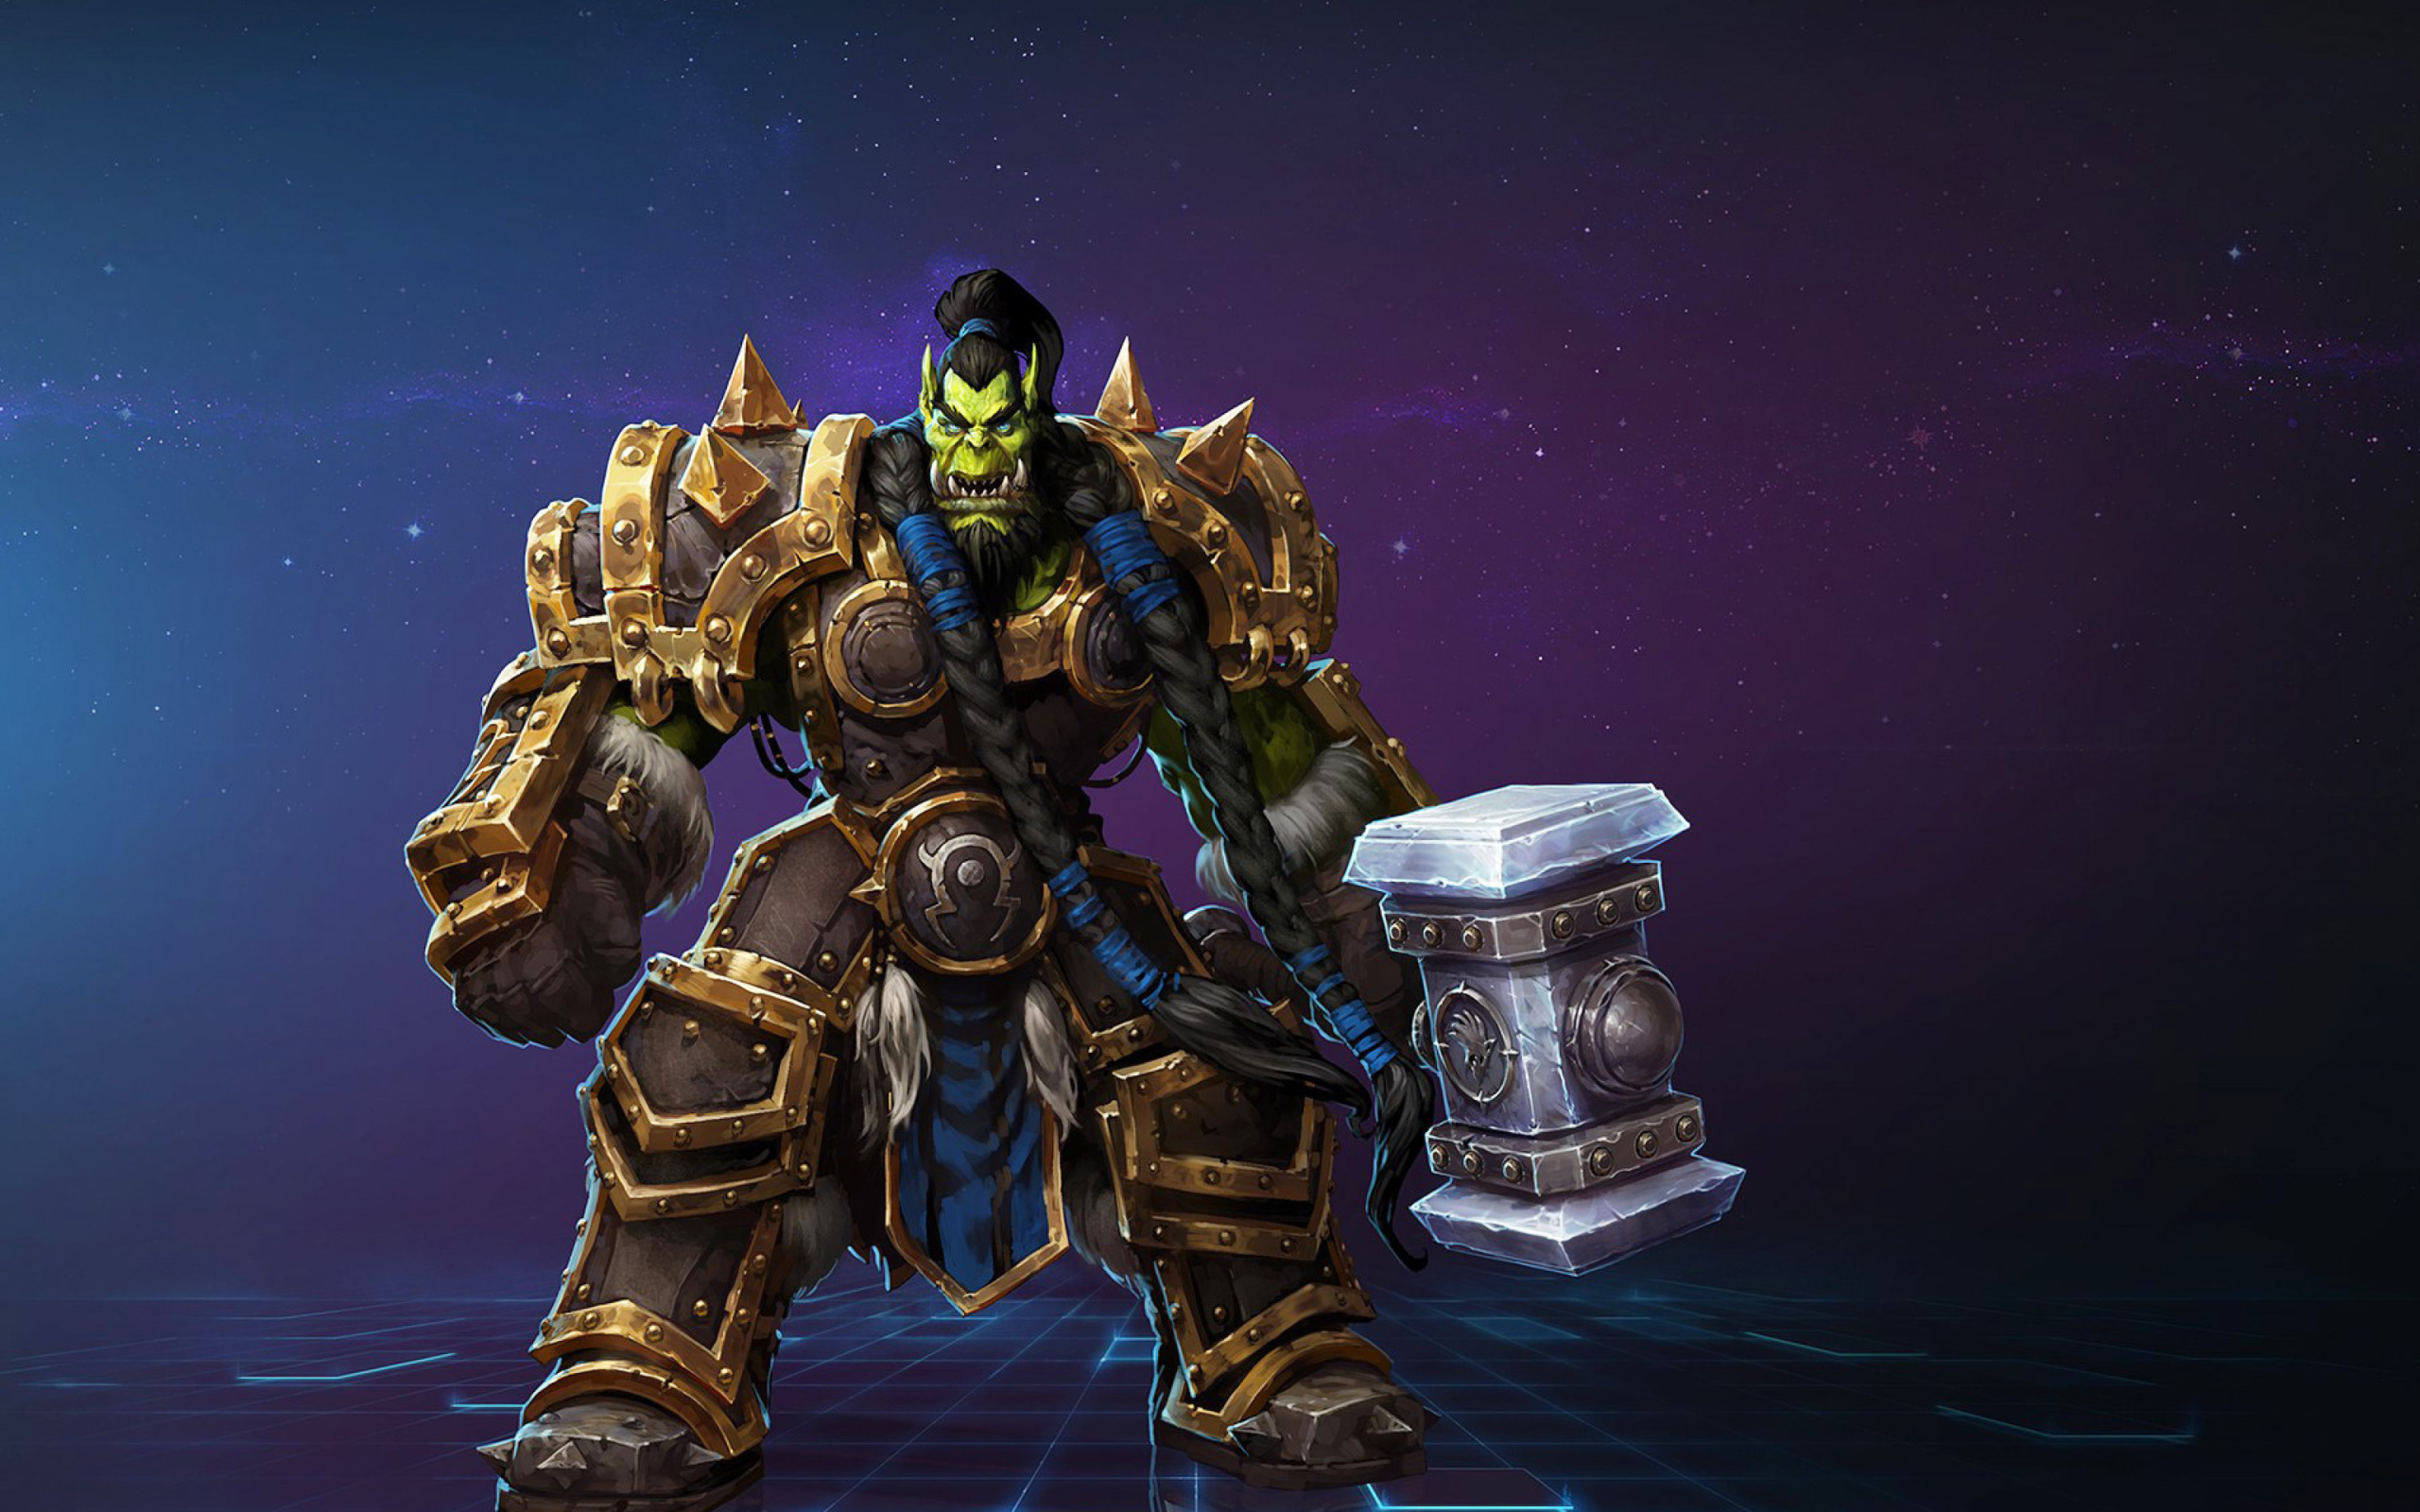 Heroes of the Storm multiplayer online battle arena video game wallpaper 2560x1600